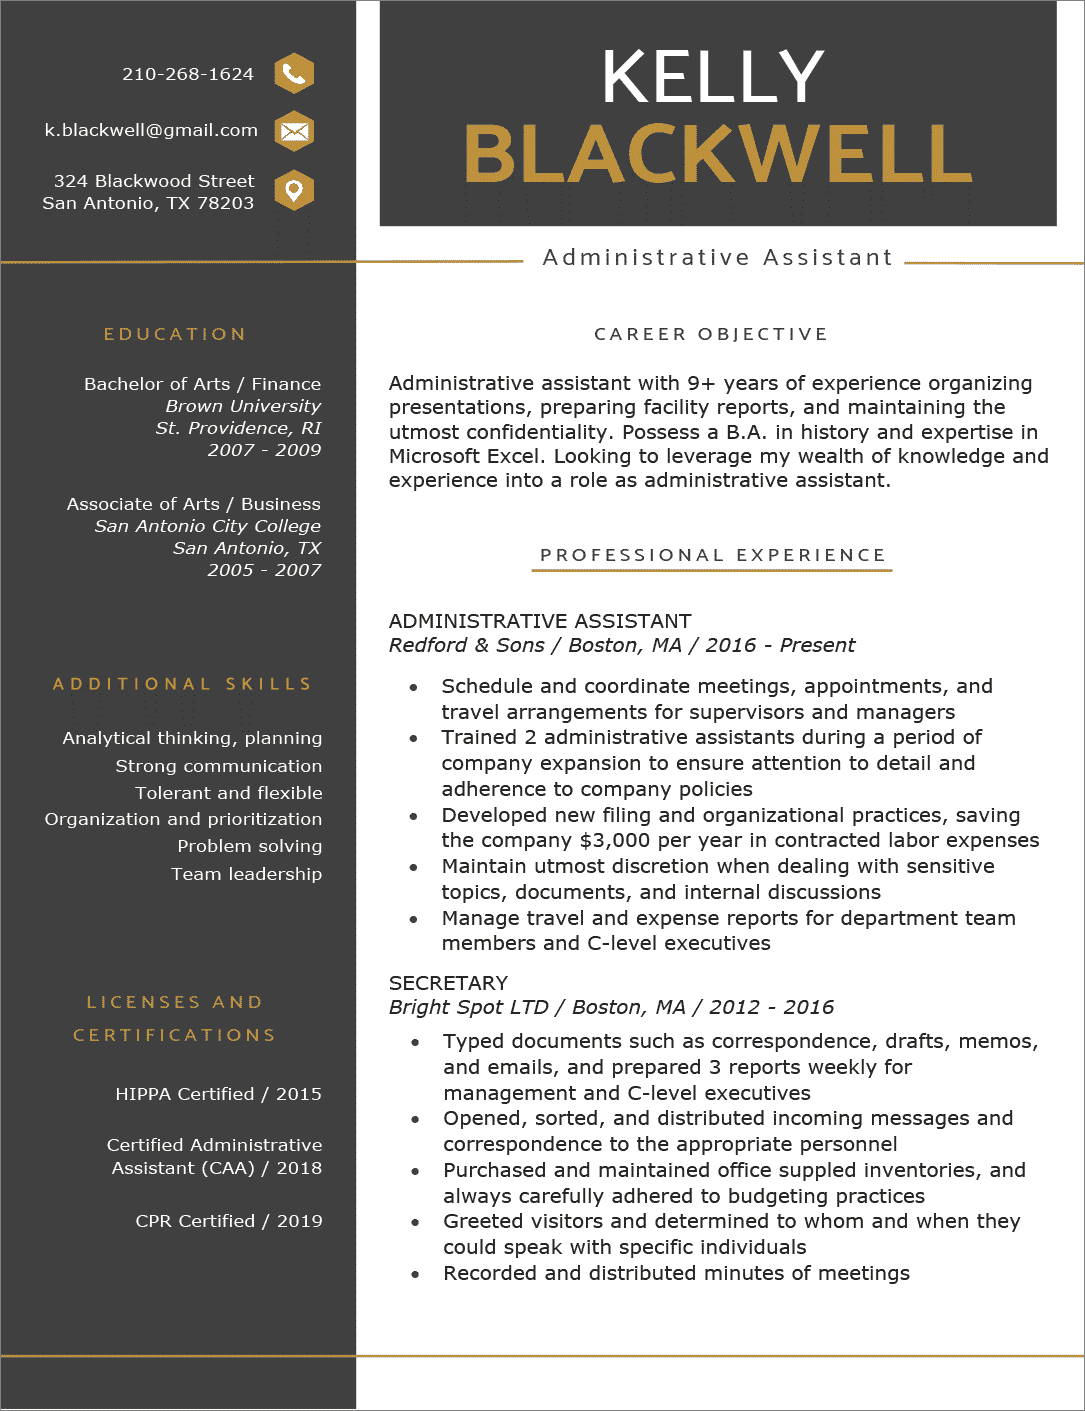 abstract on online resume builder